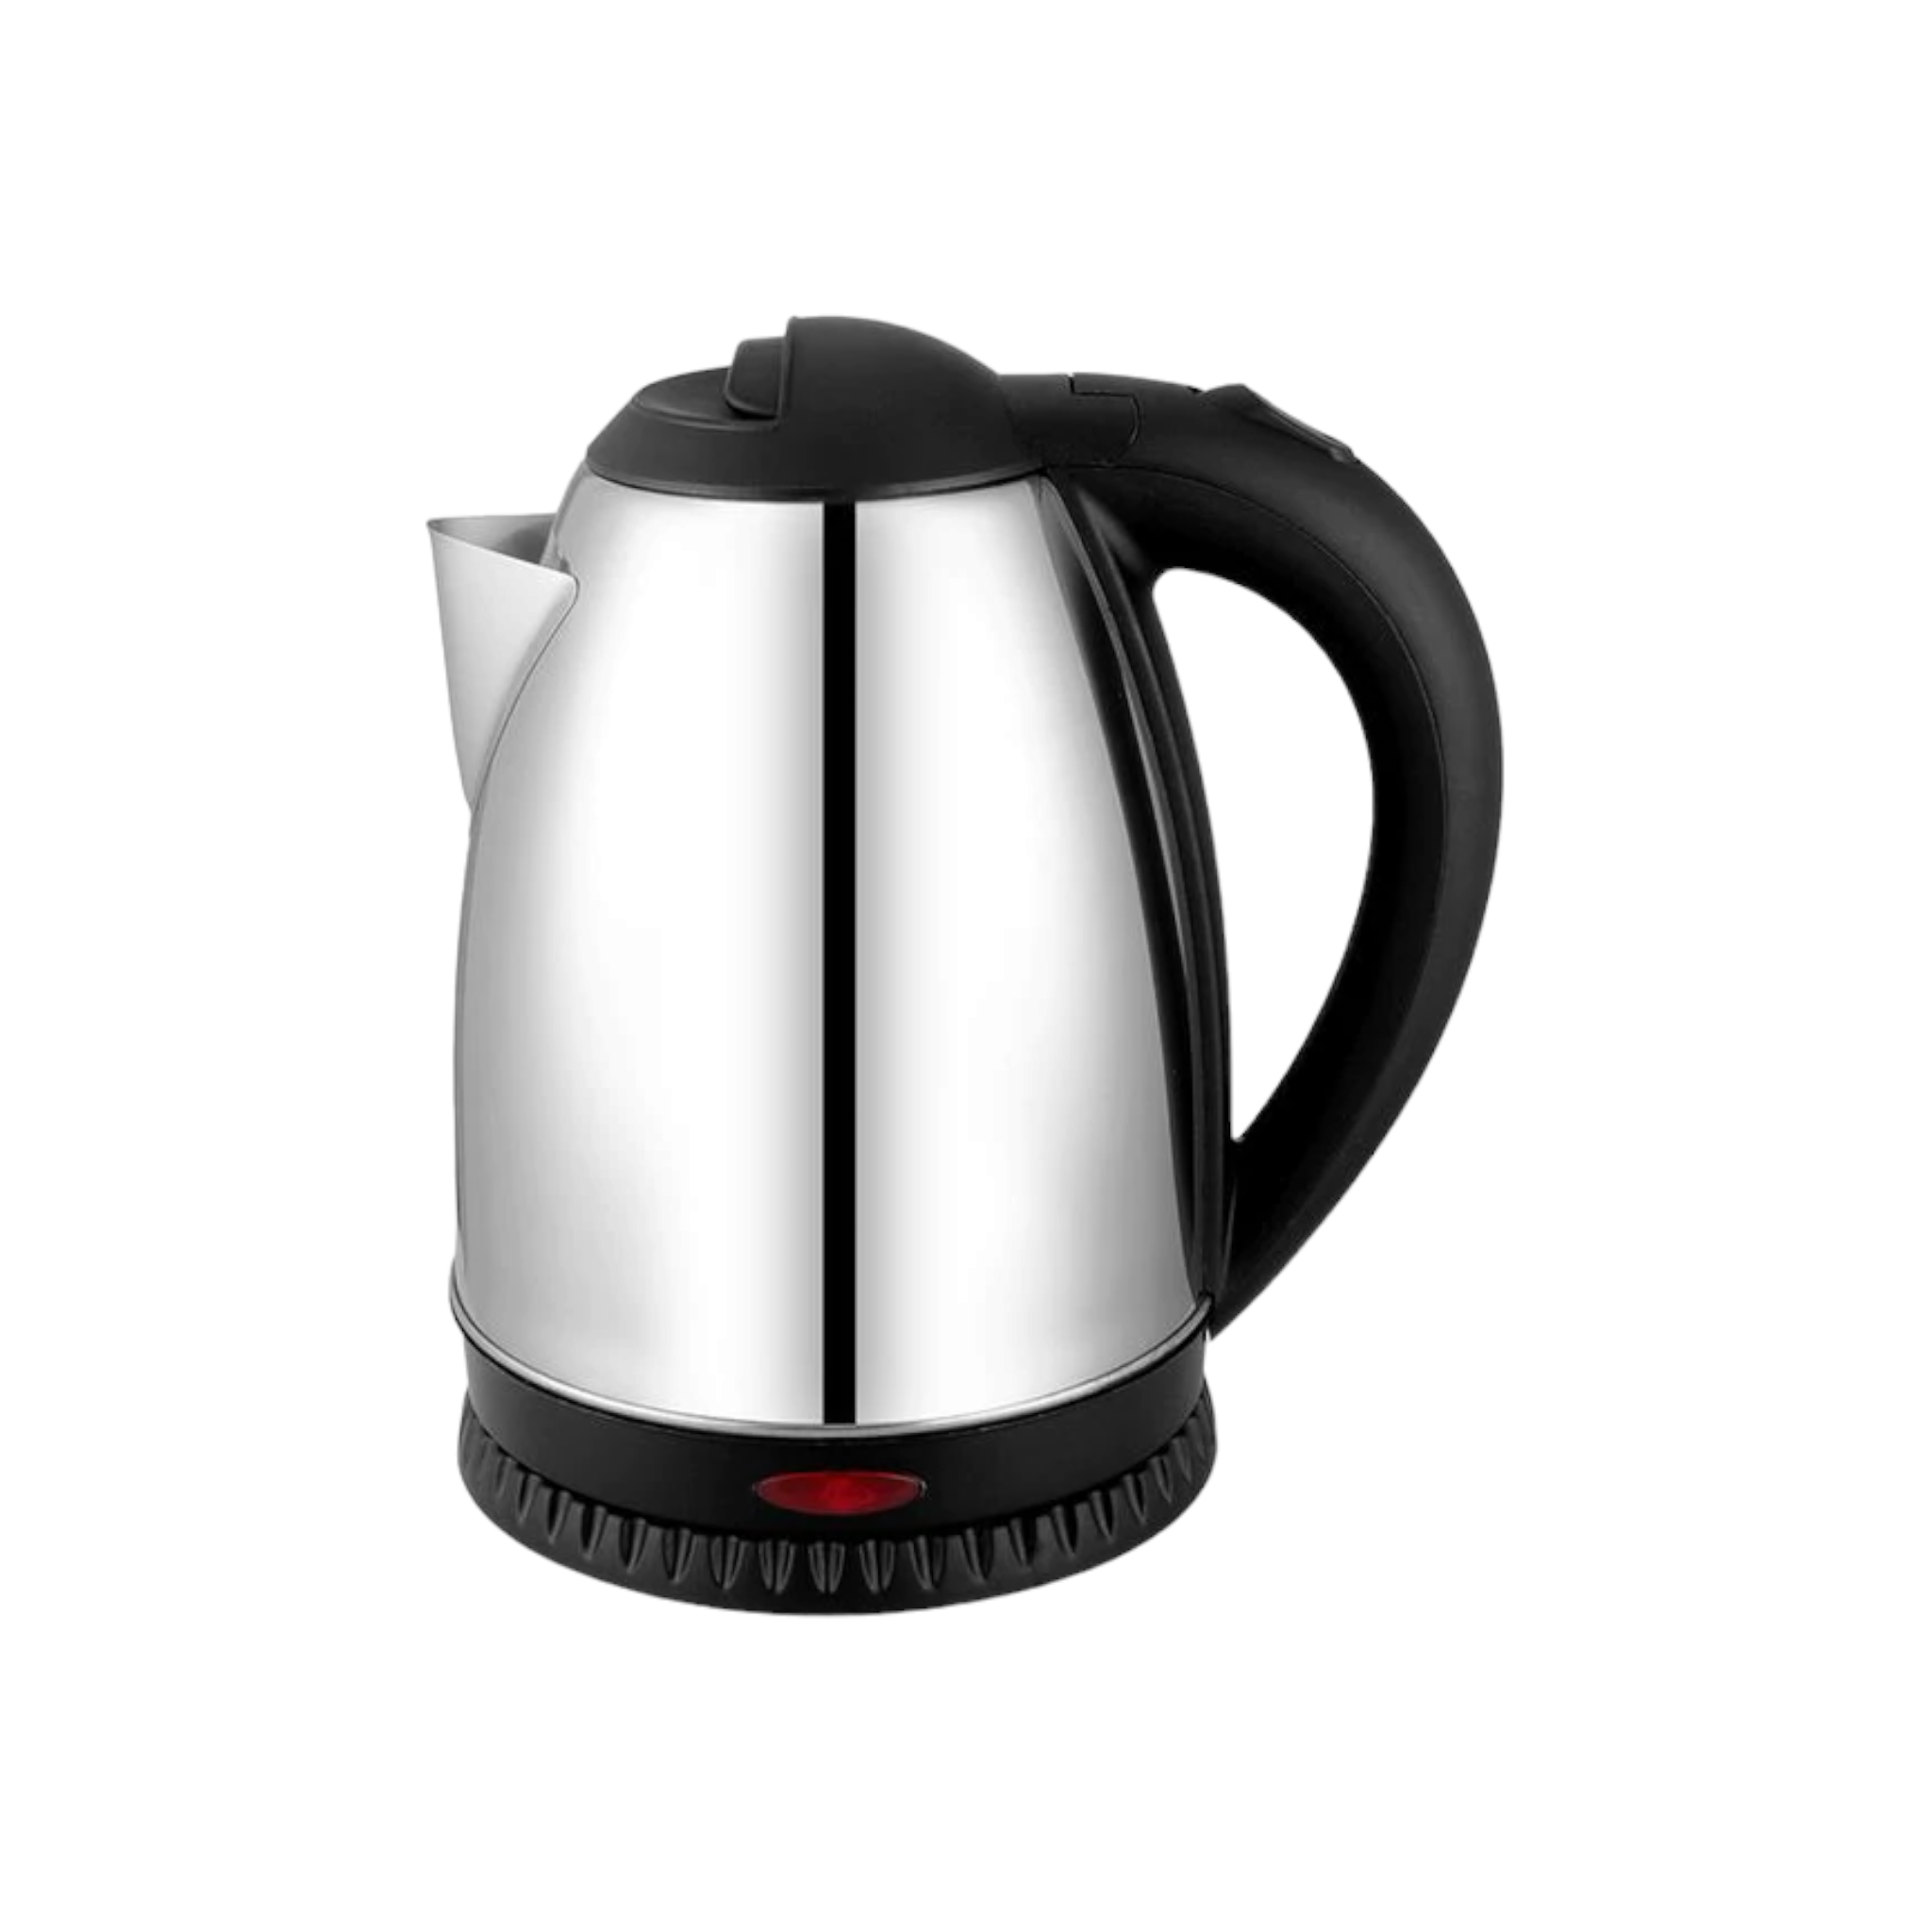 Ailyons Kettle Stainless Steel SK 0304